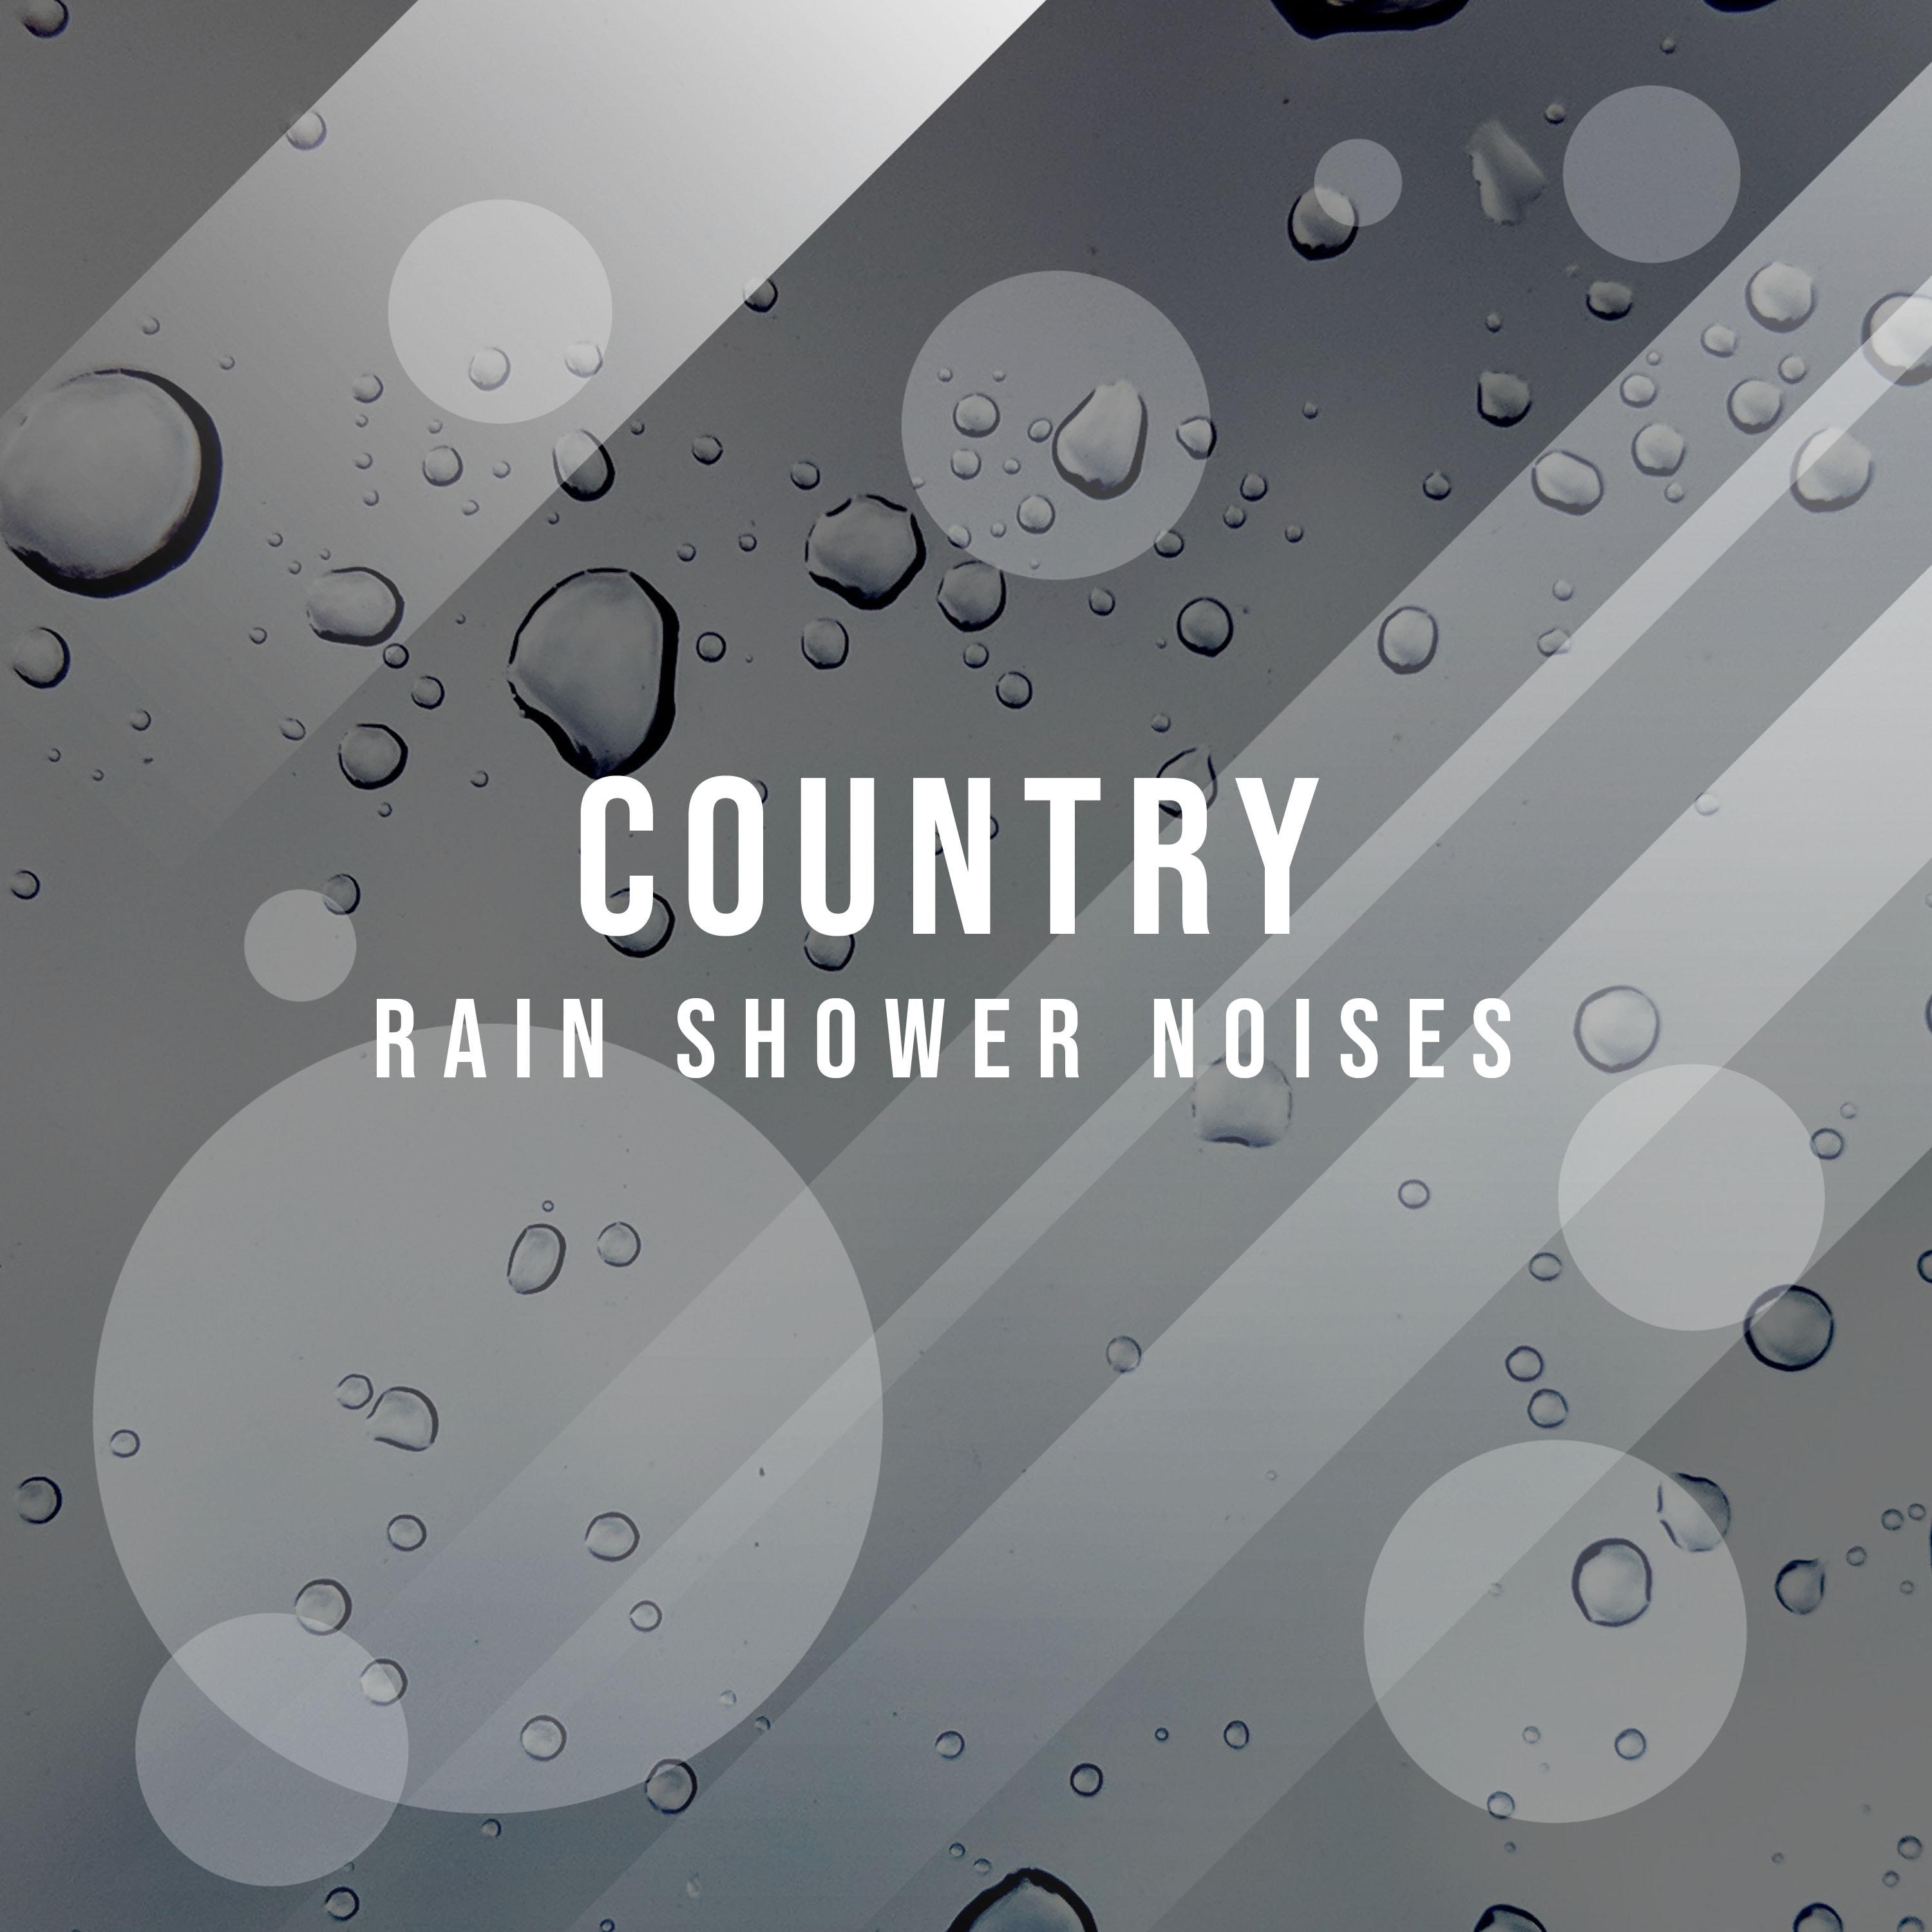 #18 Country Rain Shower Noises for Spa & Sleep Relaxation